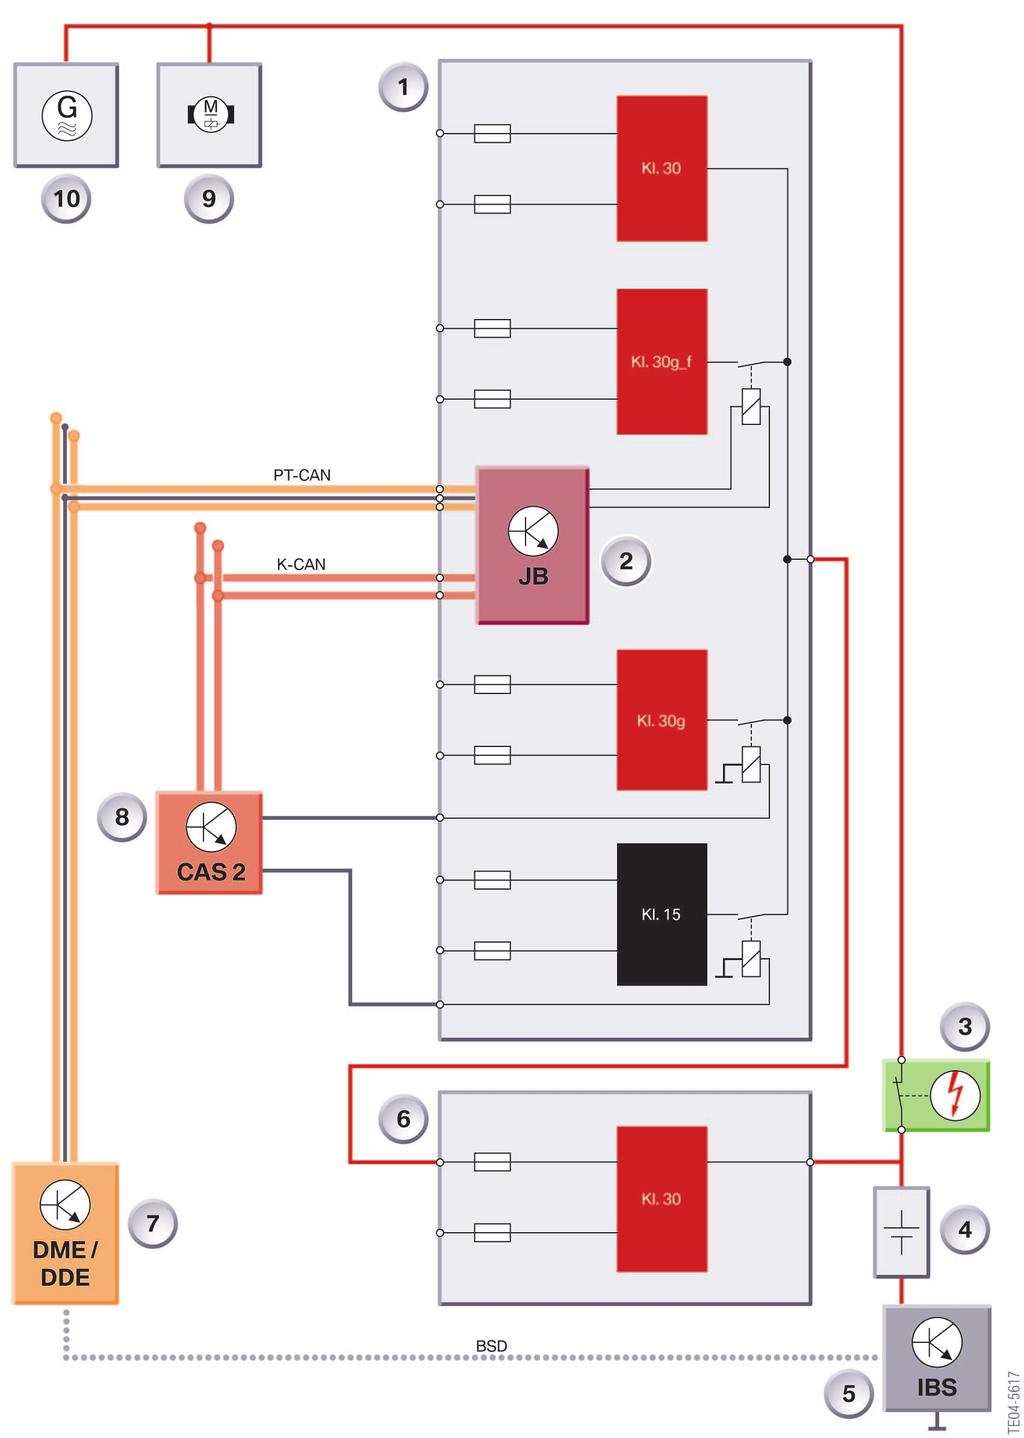 5 Energy management with junction box 3